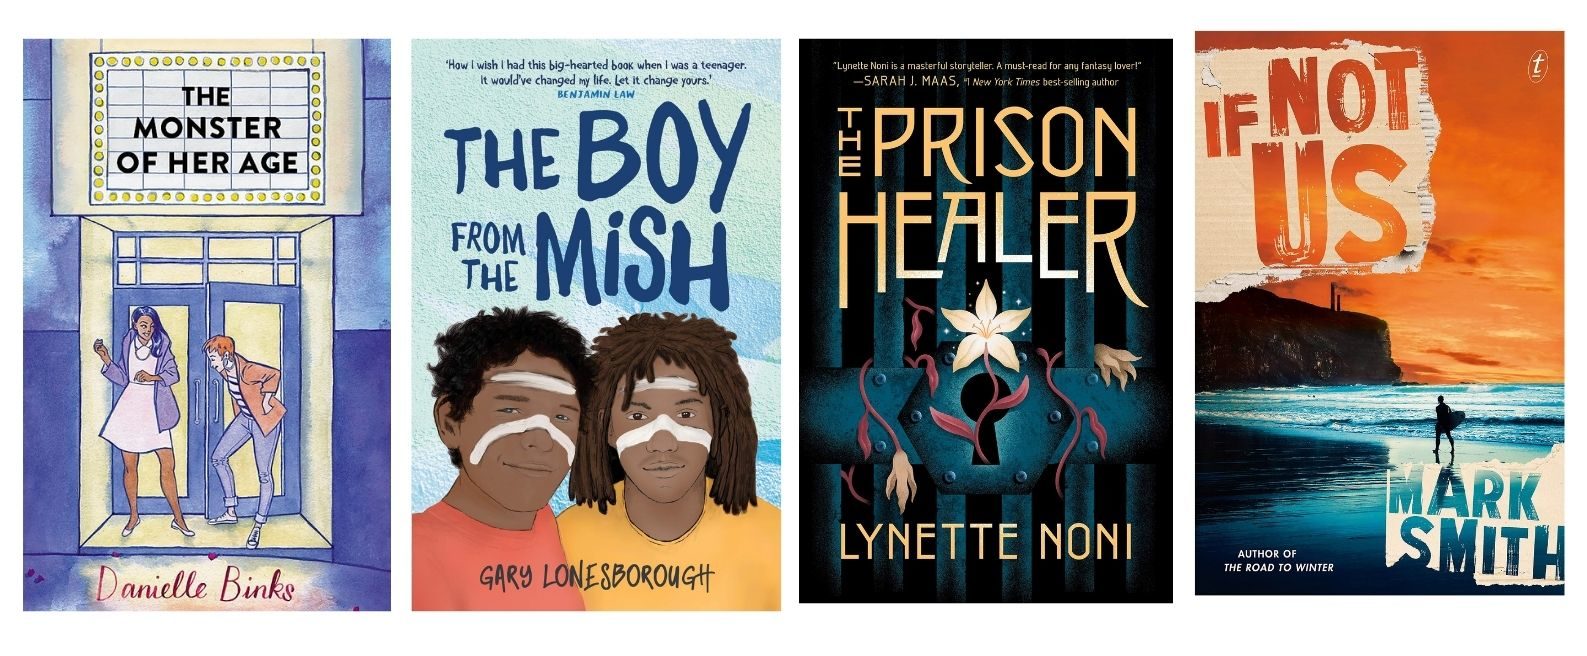 Indie Book Award Nominees for Young Adult Fiction